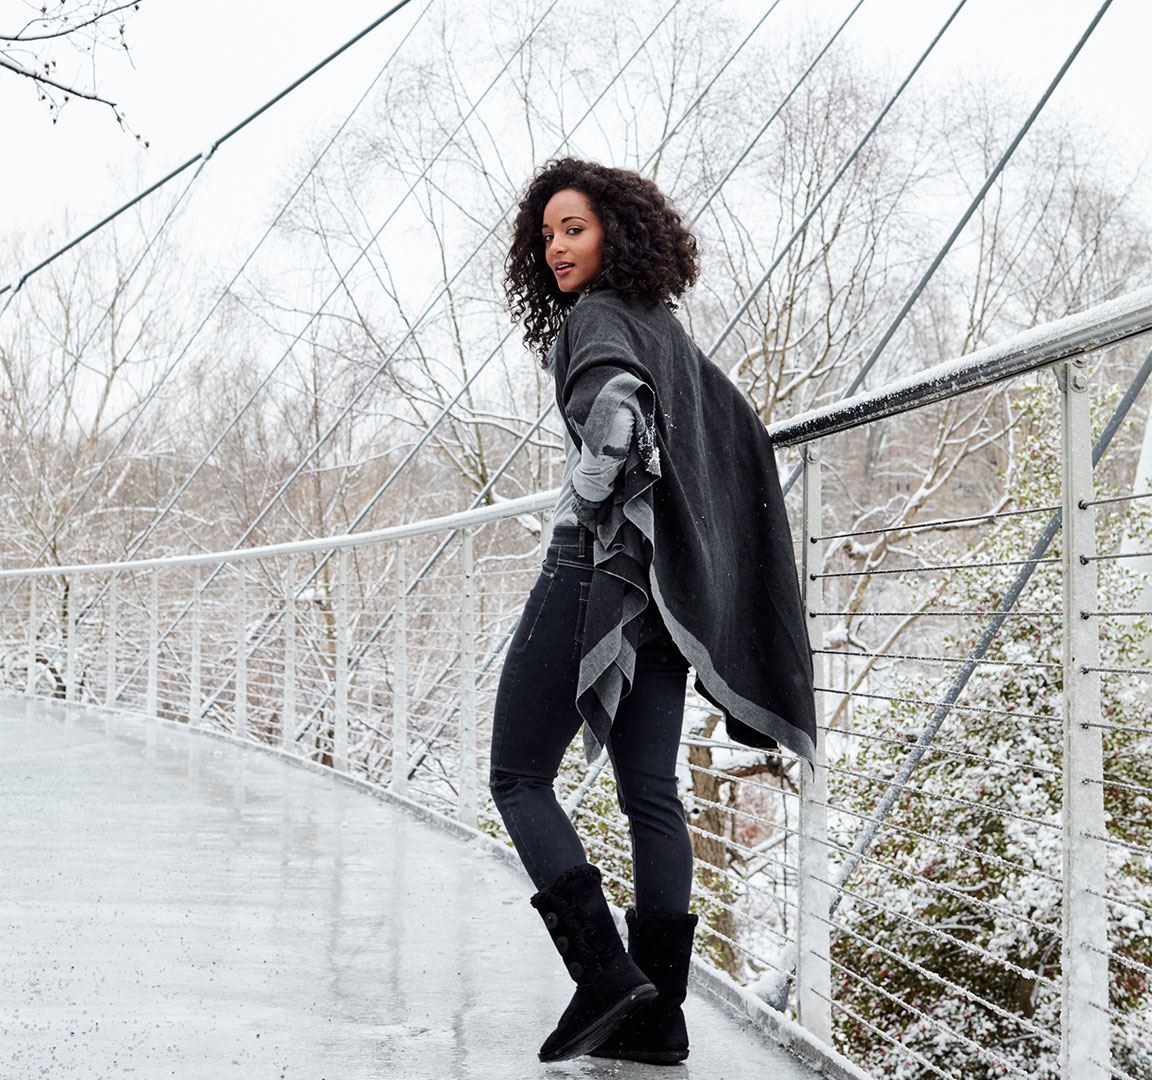 Fashion model on snowy bridge photographed by commerical apparel photographer Kate Benson.